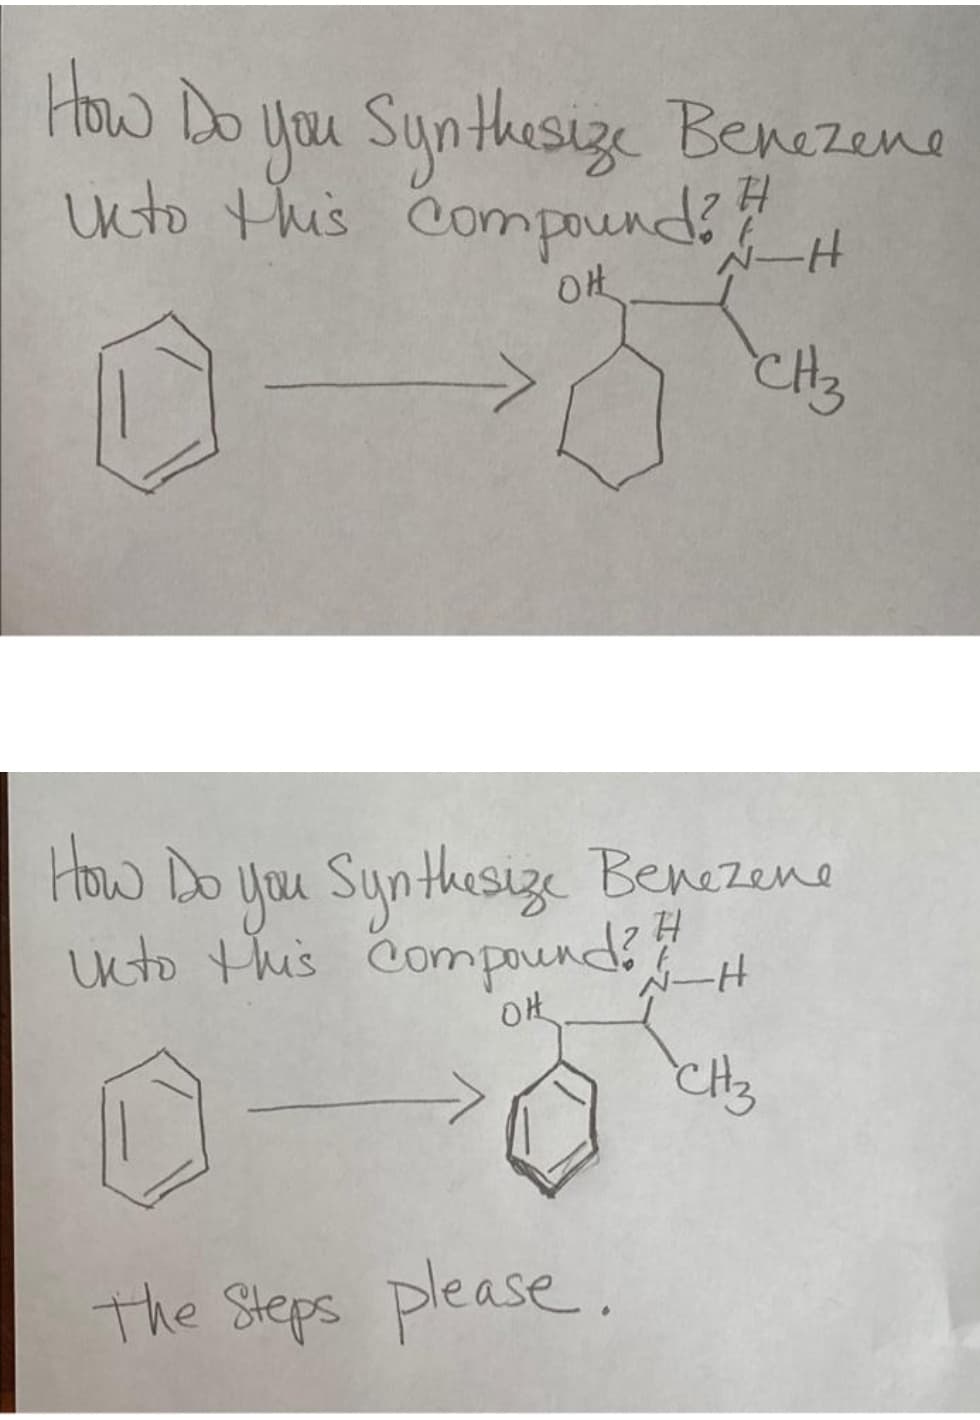 How Do
you Synthesize Benezene
usto this CompoundH
CH3
How Do you Synthesize Benezene
ucto this CompoundH
The Steps please.
